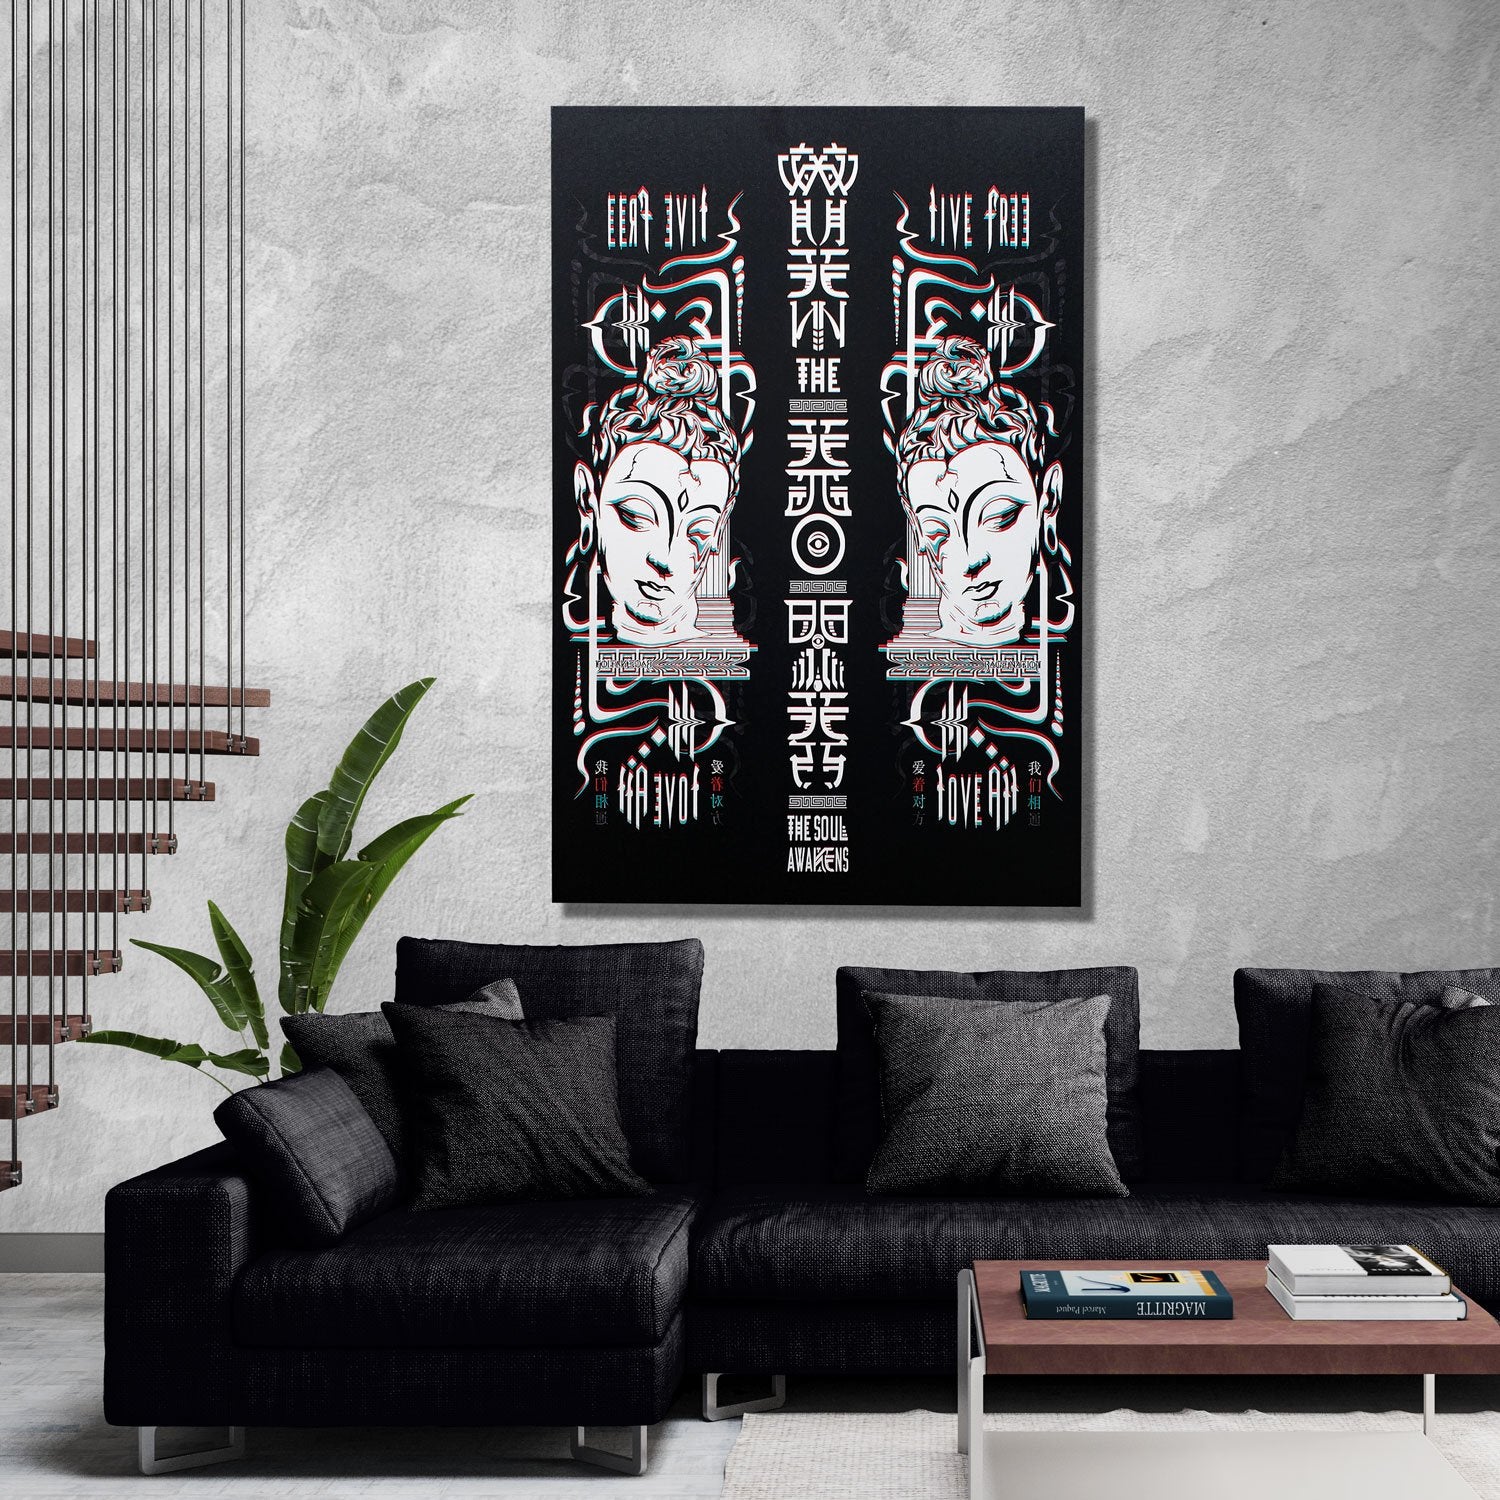 LIVE FREE LOVE ALL • Vertical Canvas Wrap Canvas 